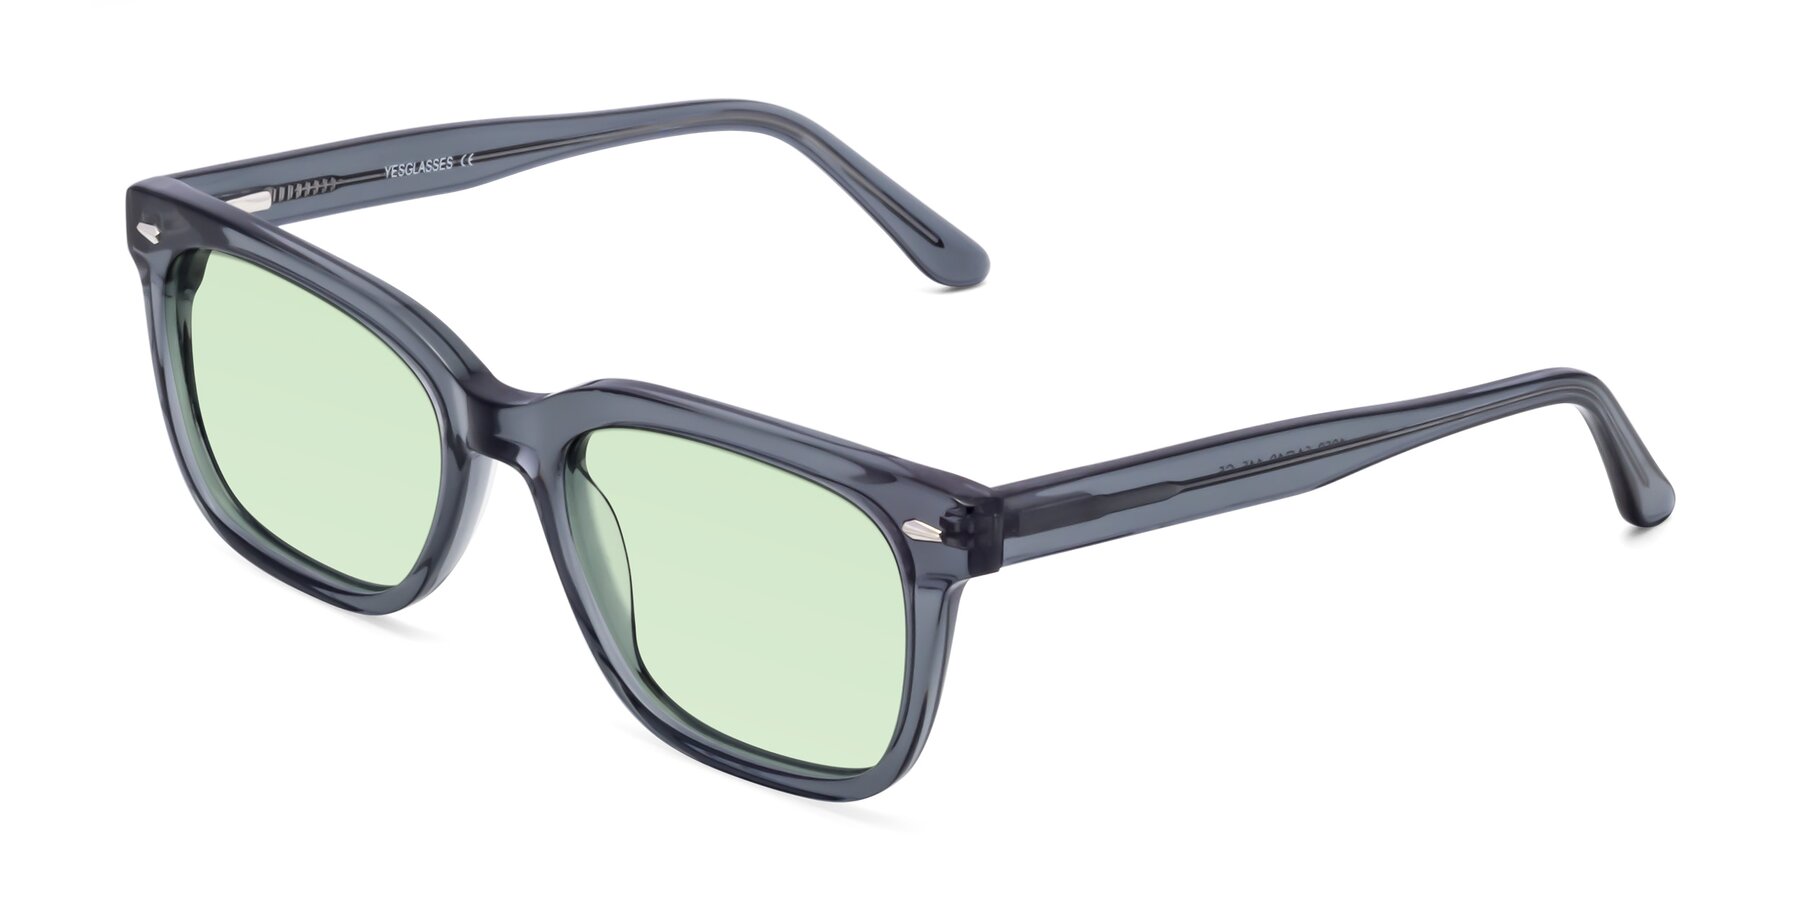 Angle of 1052 in Transparent Gray with Light Green Tinted Lenses